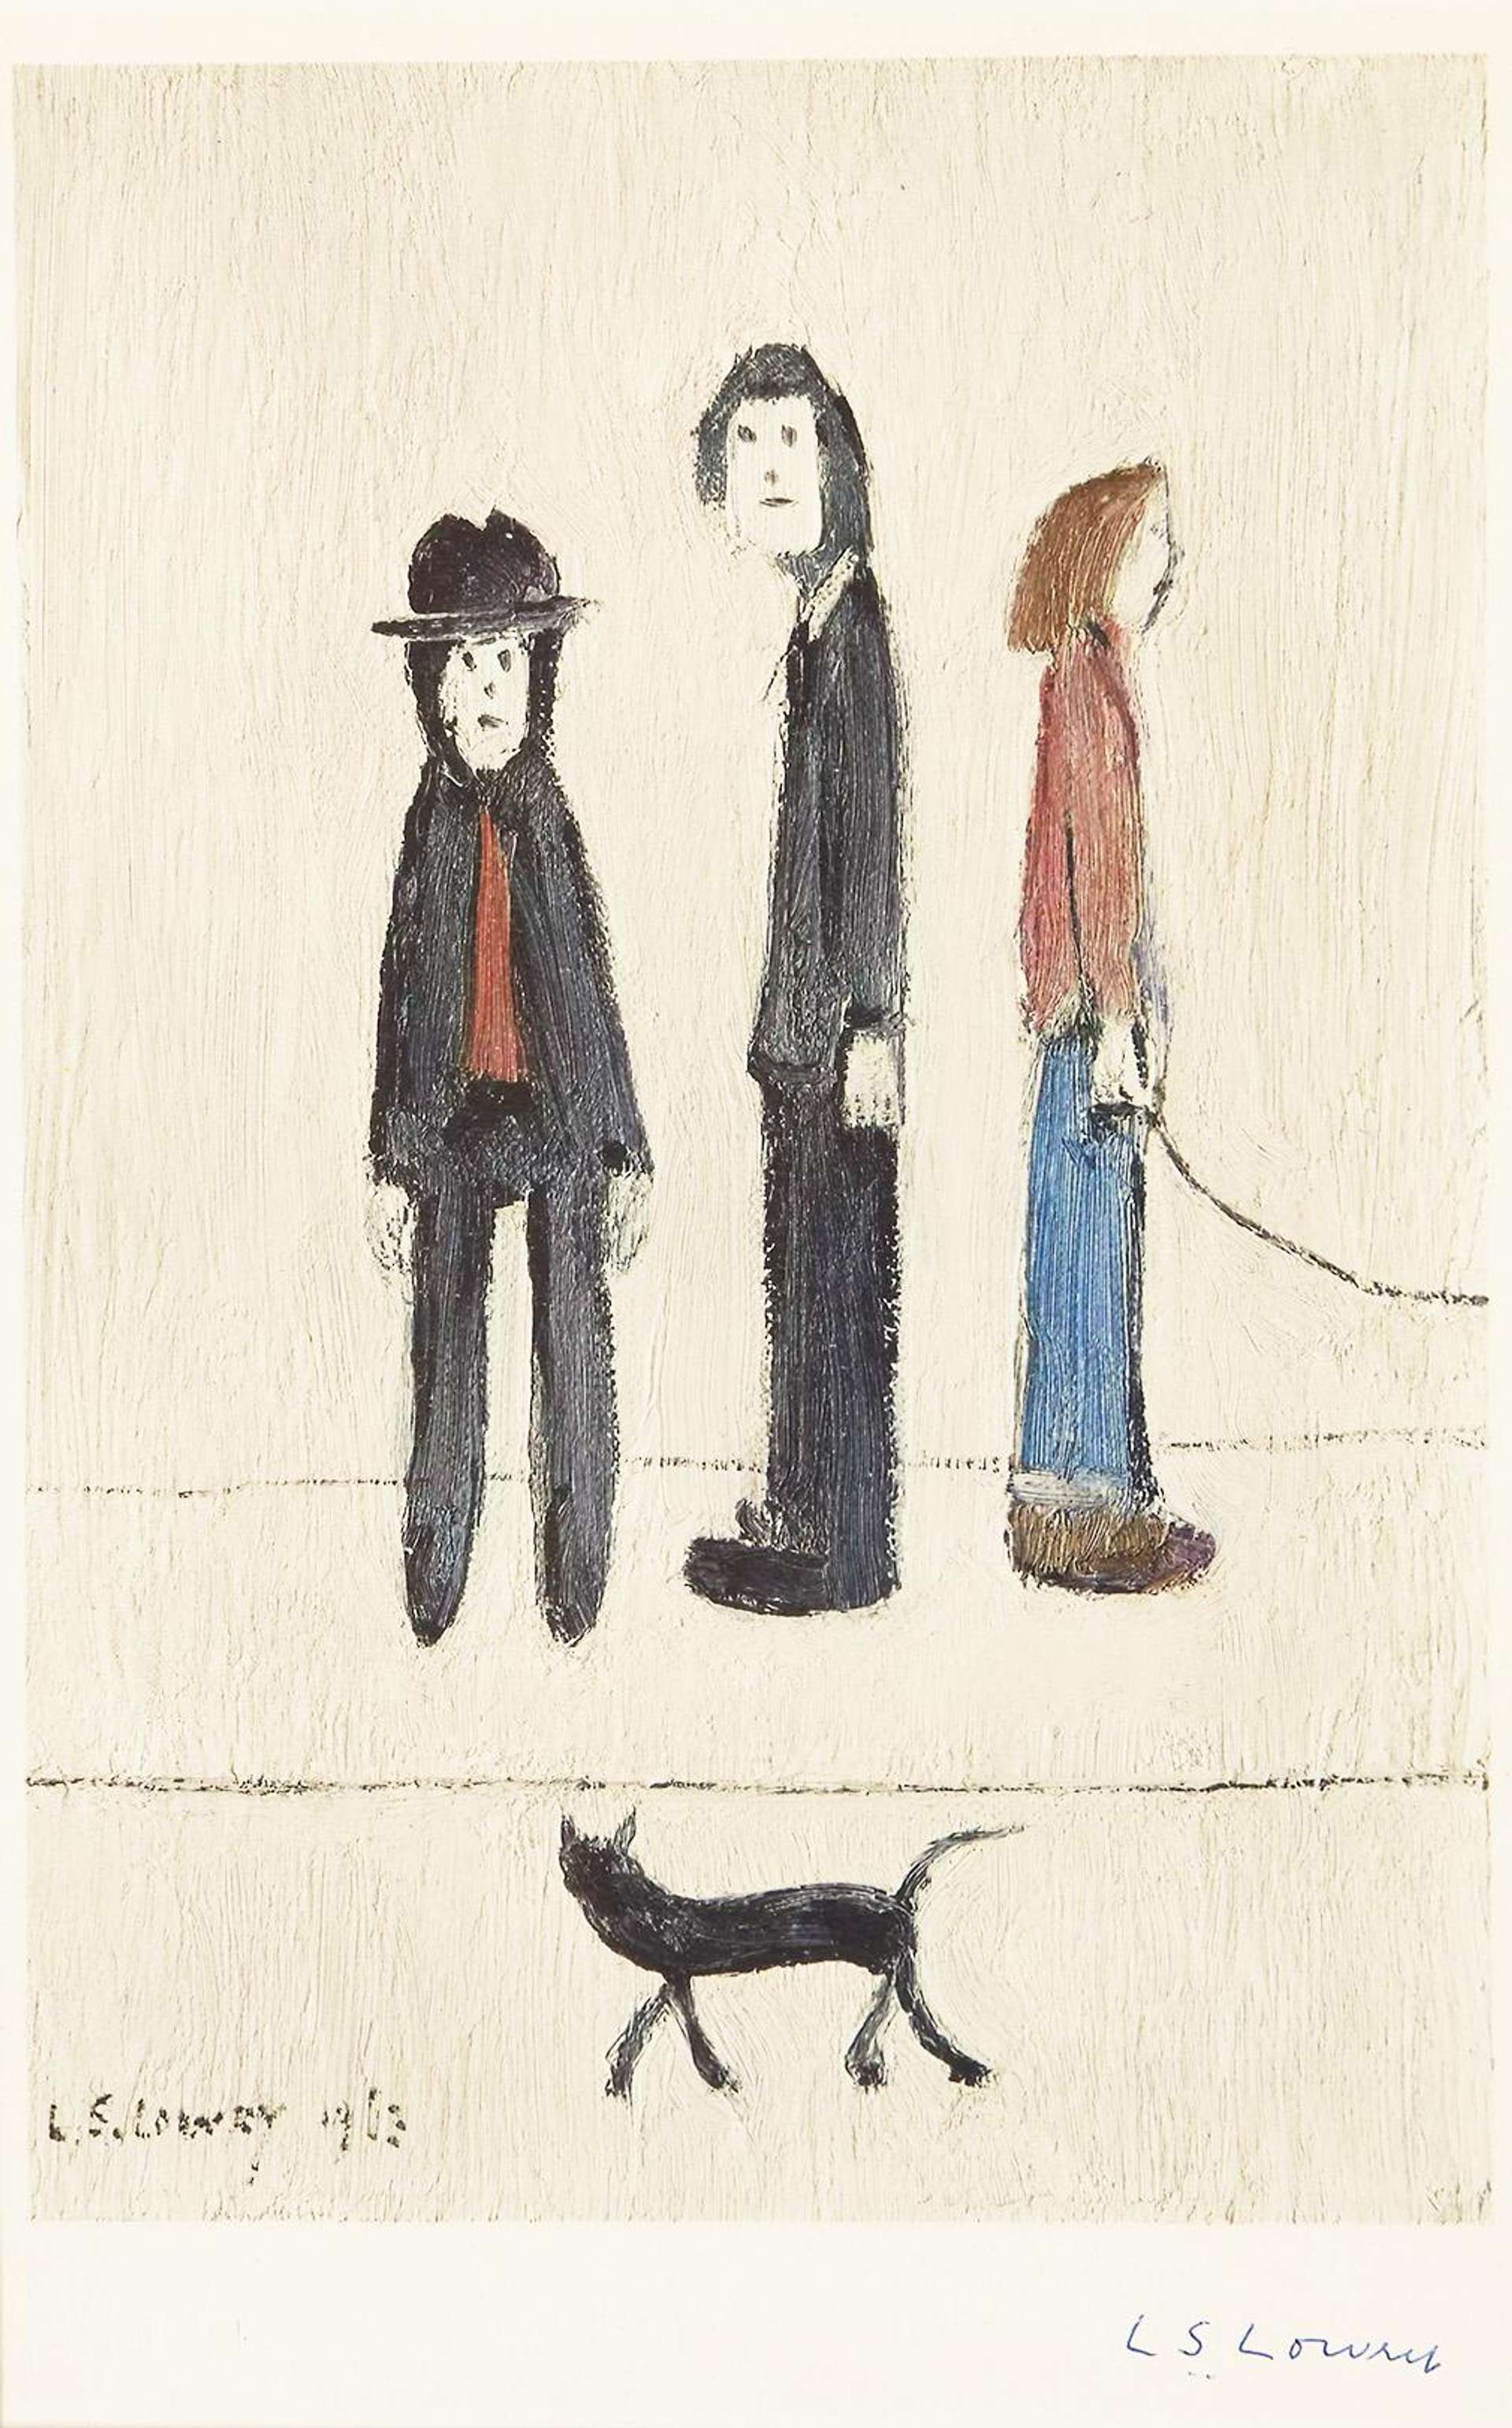 A depiction of three men, in a very simplified, "match-stick" style. Two of them gaze towards the viewer, while one is in a side profile. A black cat is in the foregorund.